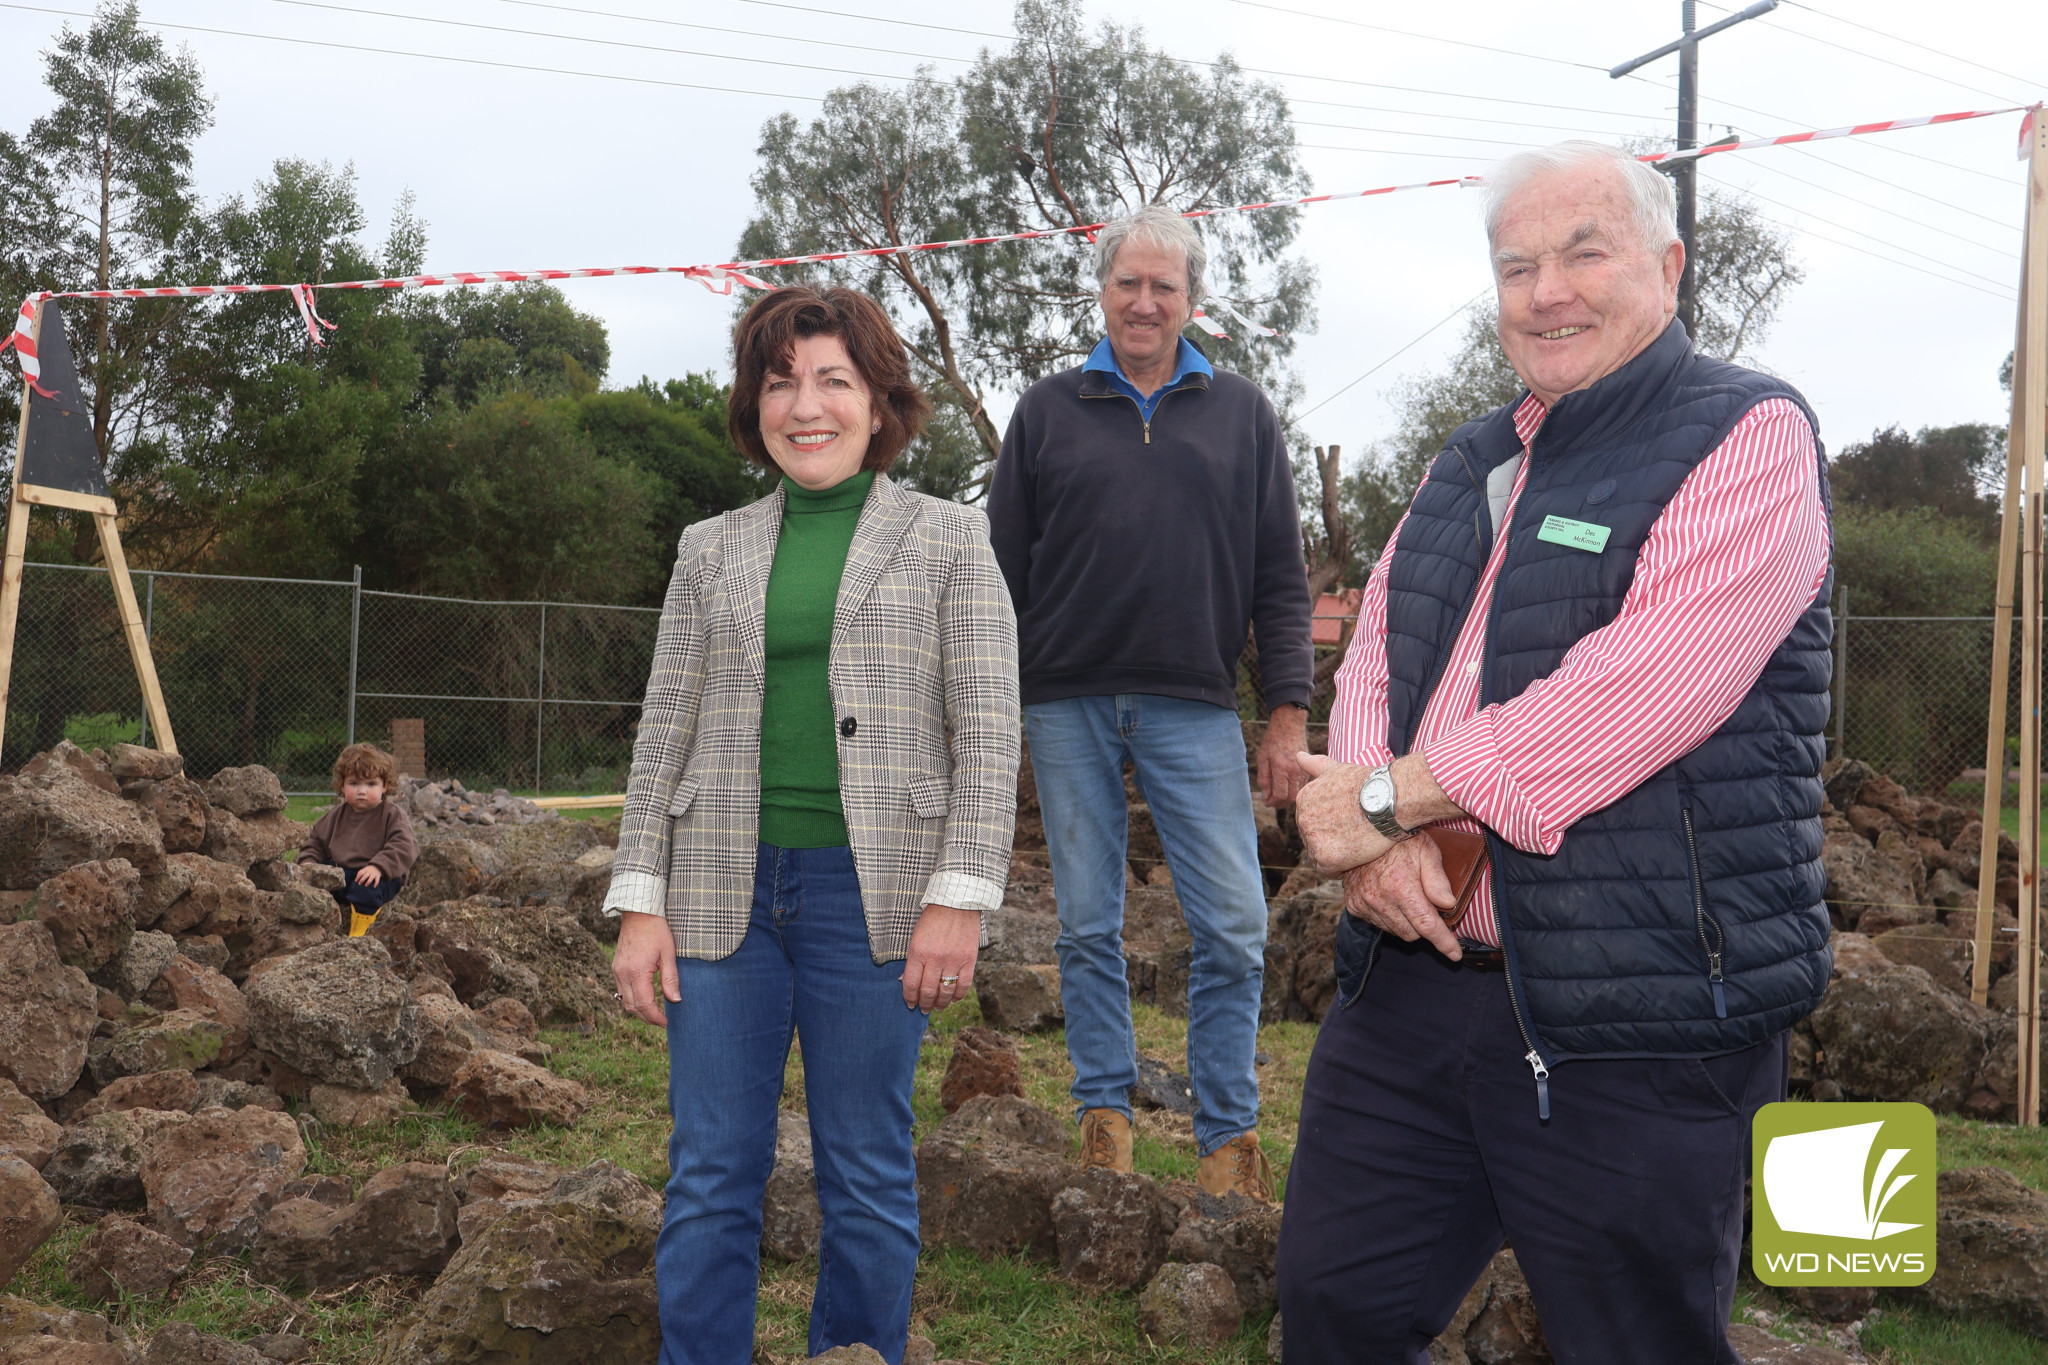 Welcome: Master stonemason David Long has begun laying stone for a new welcome sign in Terang next week, 30 years after building the entrance sign on the opposite side of town. Pictured with Mr Long (centre) is Corangamite Shire councillor Geraldine Conheady and Terang and District Historical Society executive member Des McKinnon.